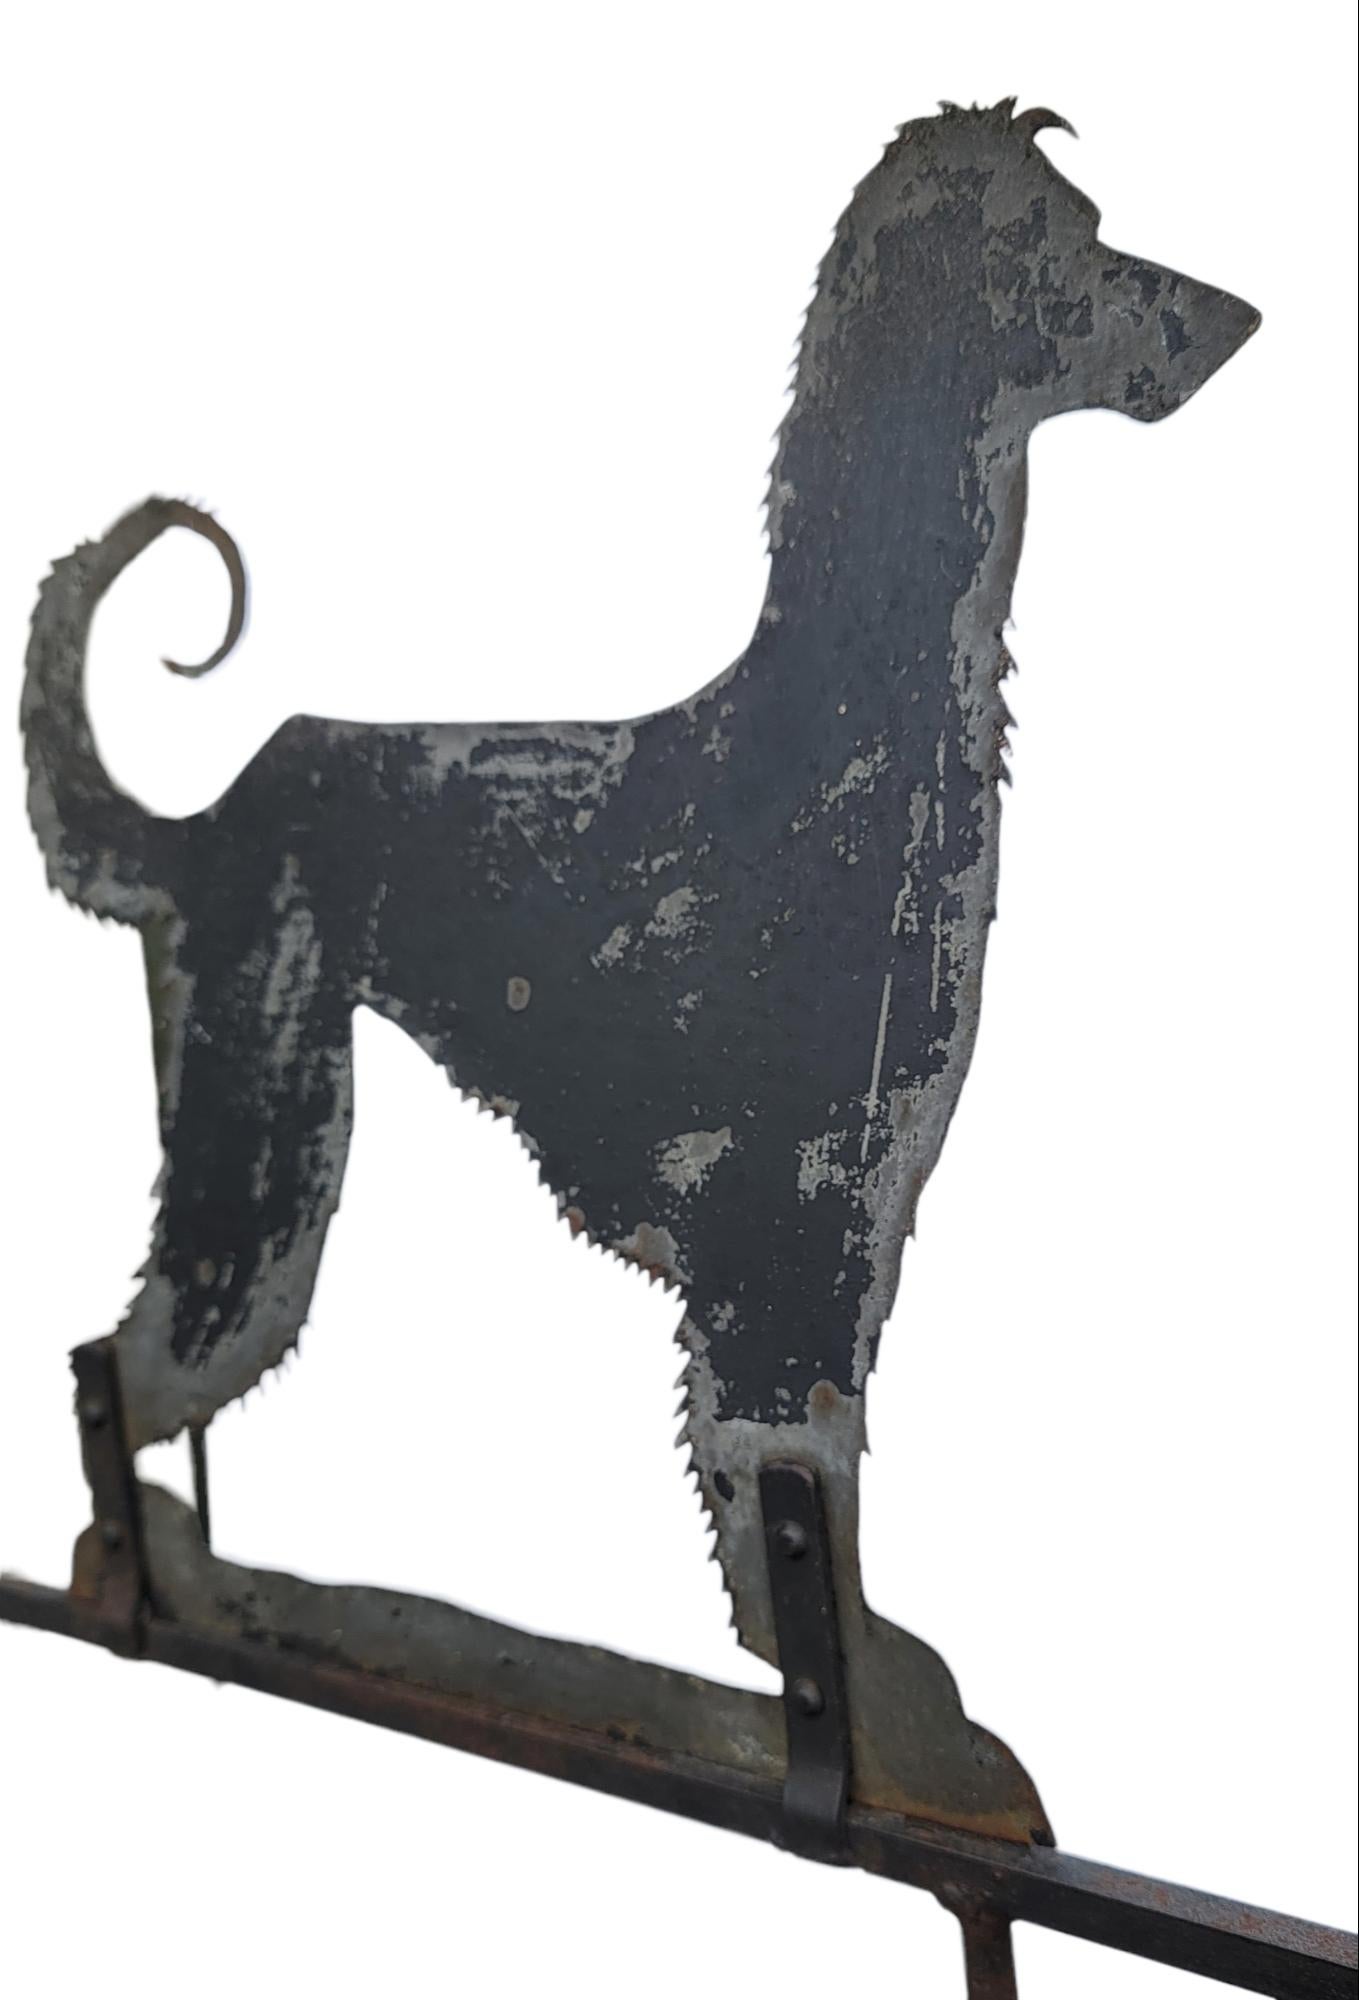 This folky hand made from sheet iron dog weather vane retains its original black painted surface.It was found in New England and is in very good condition.